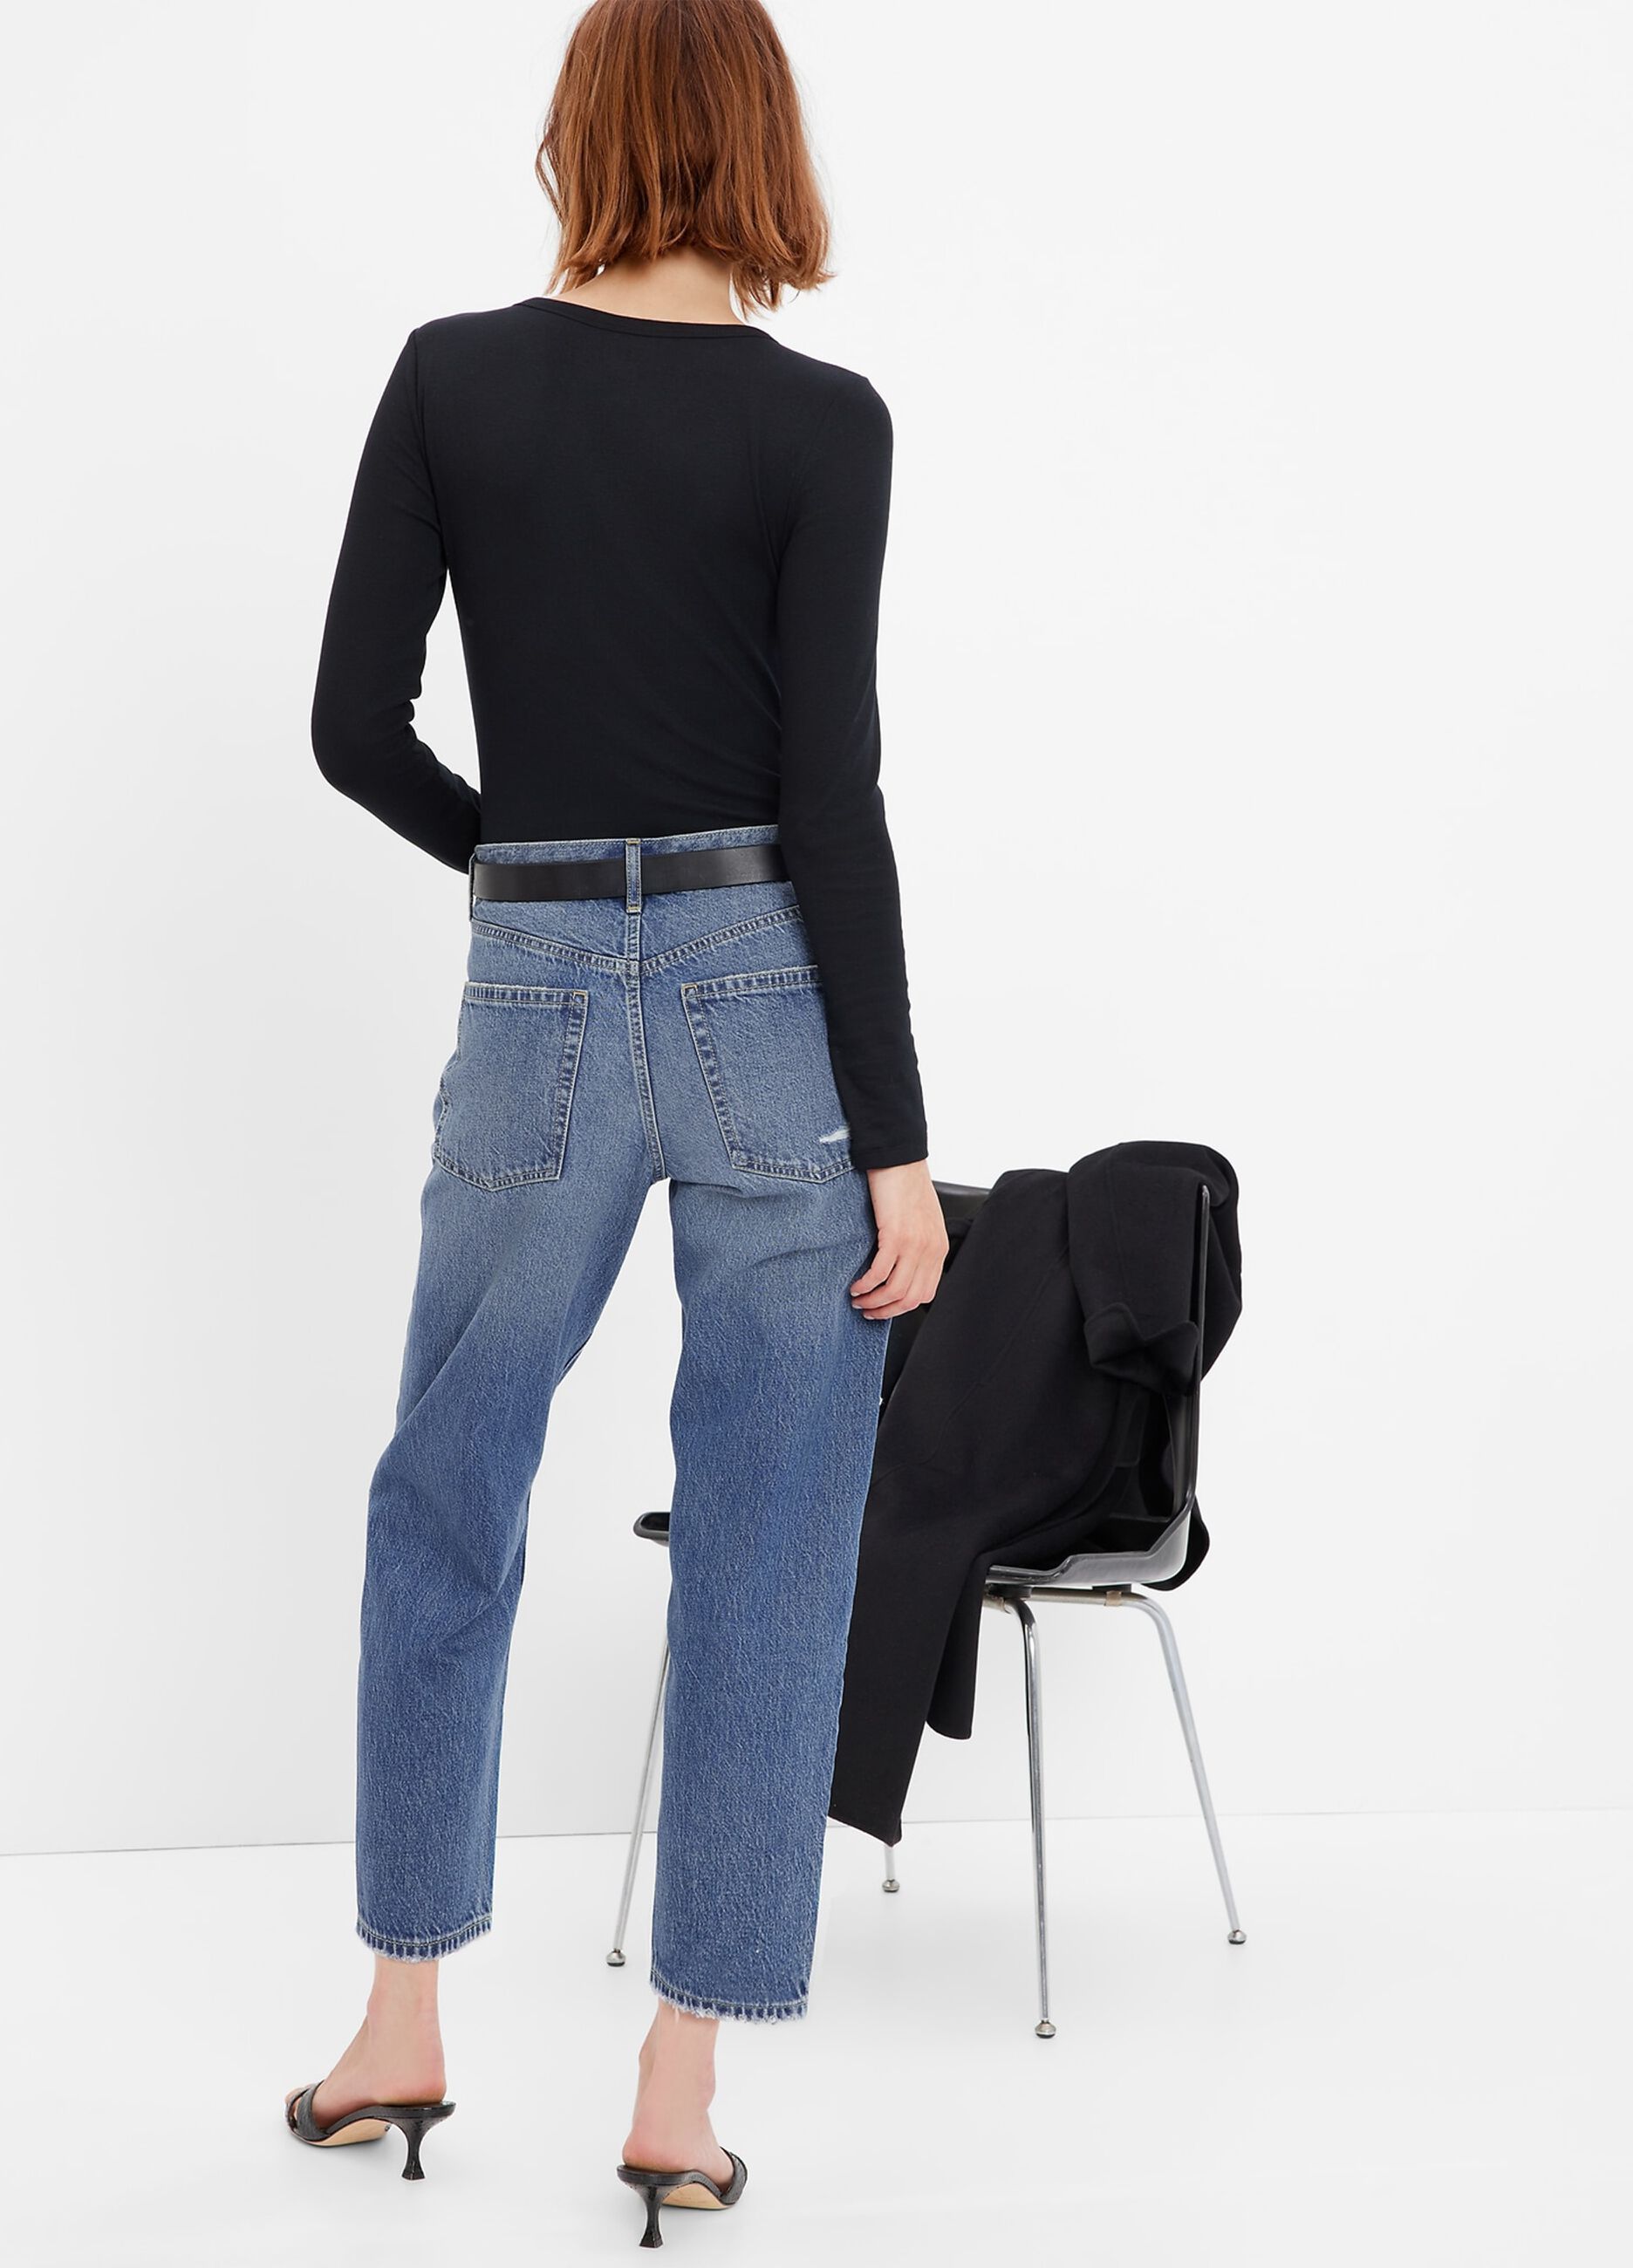 Barrel-leg jeans with rips